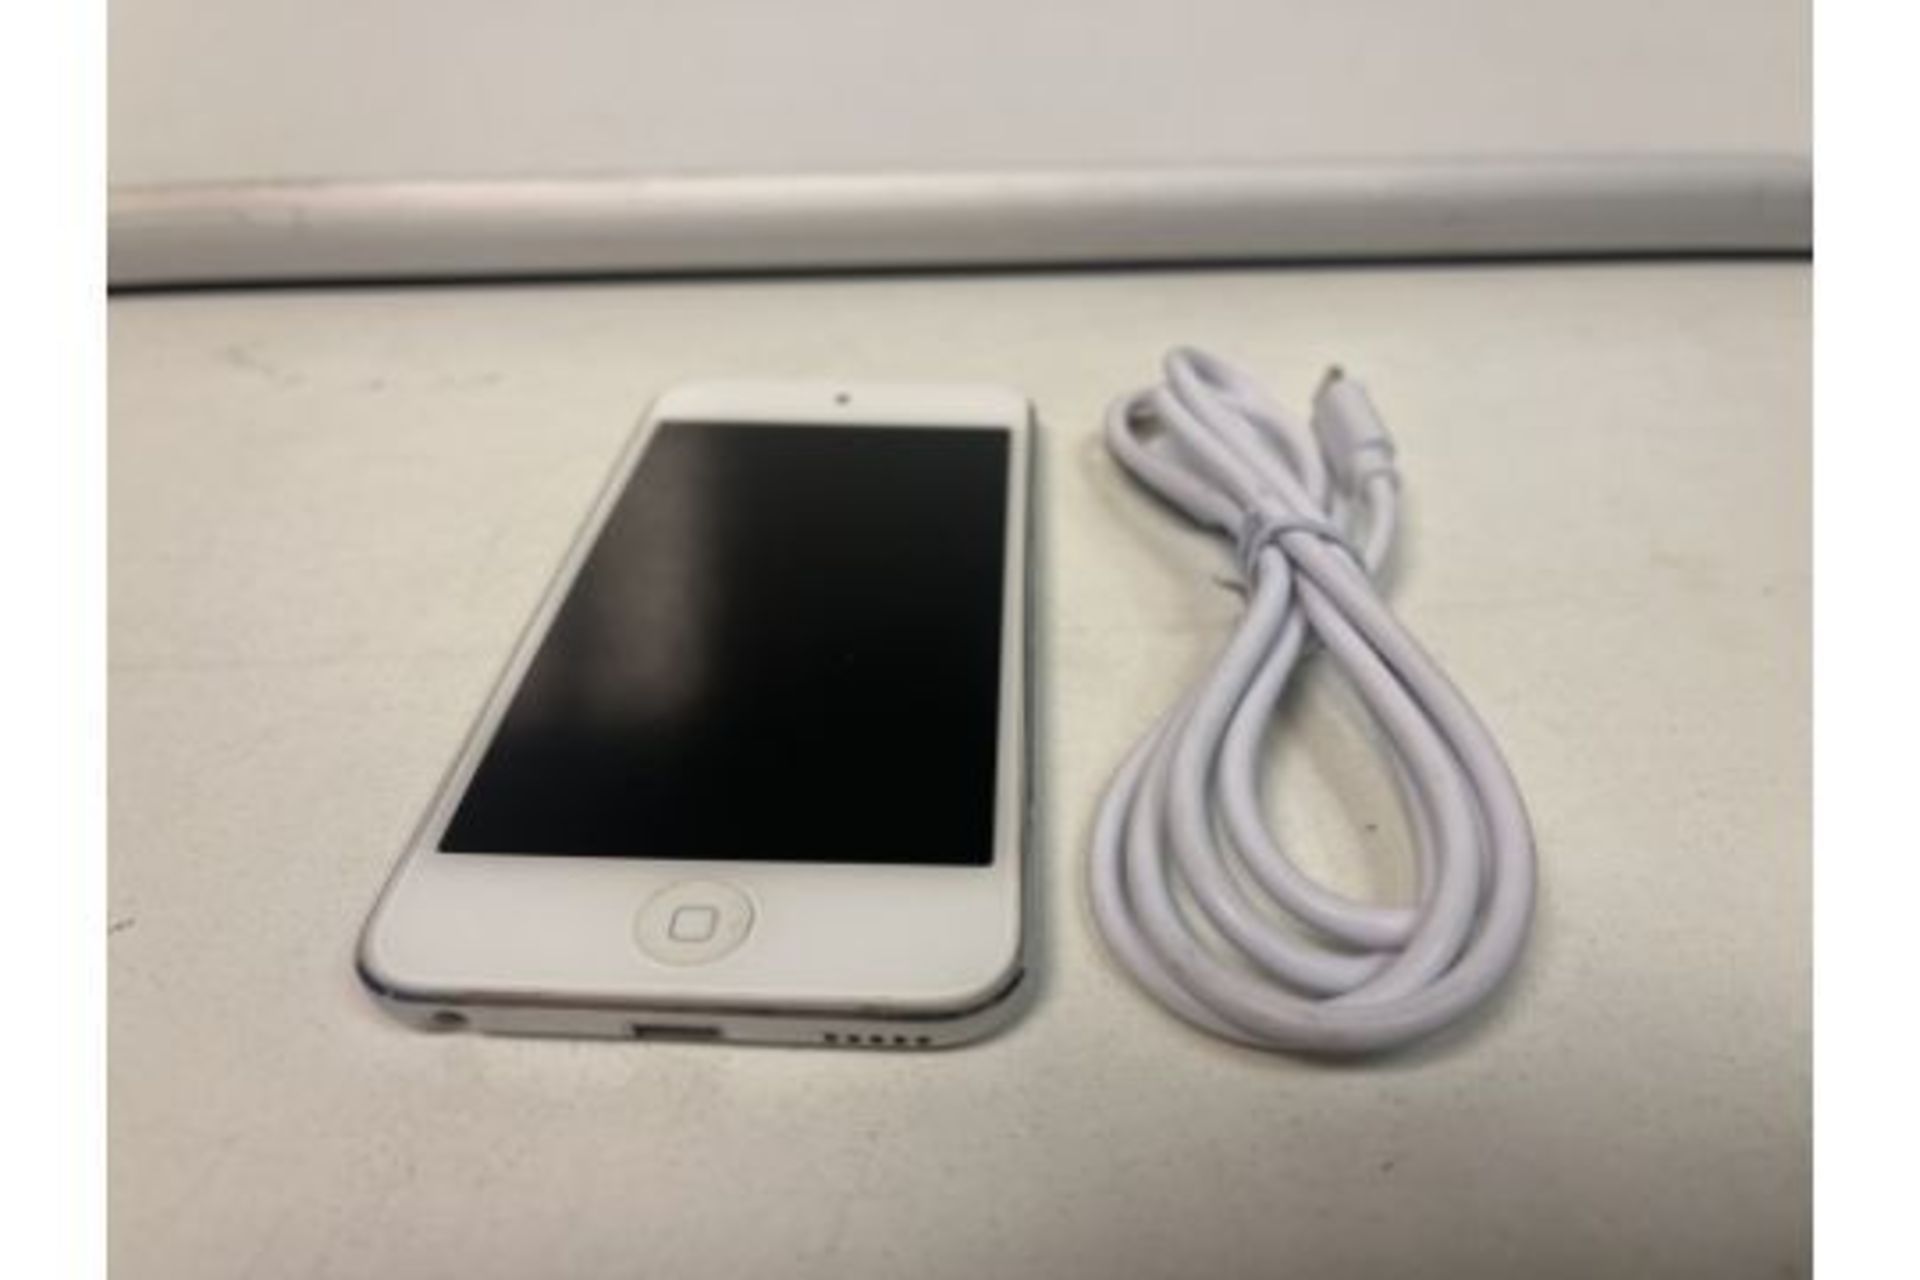 APPLE IPOD TOUCH, 5TH GEN, 32GB STORAGE WITH CHARGE CABLE (88) 203